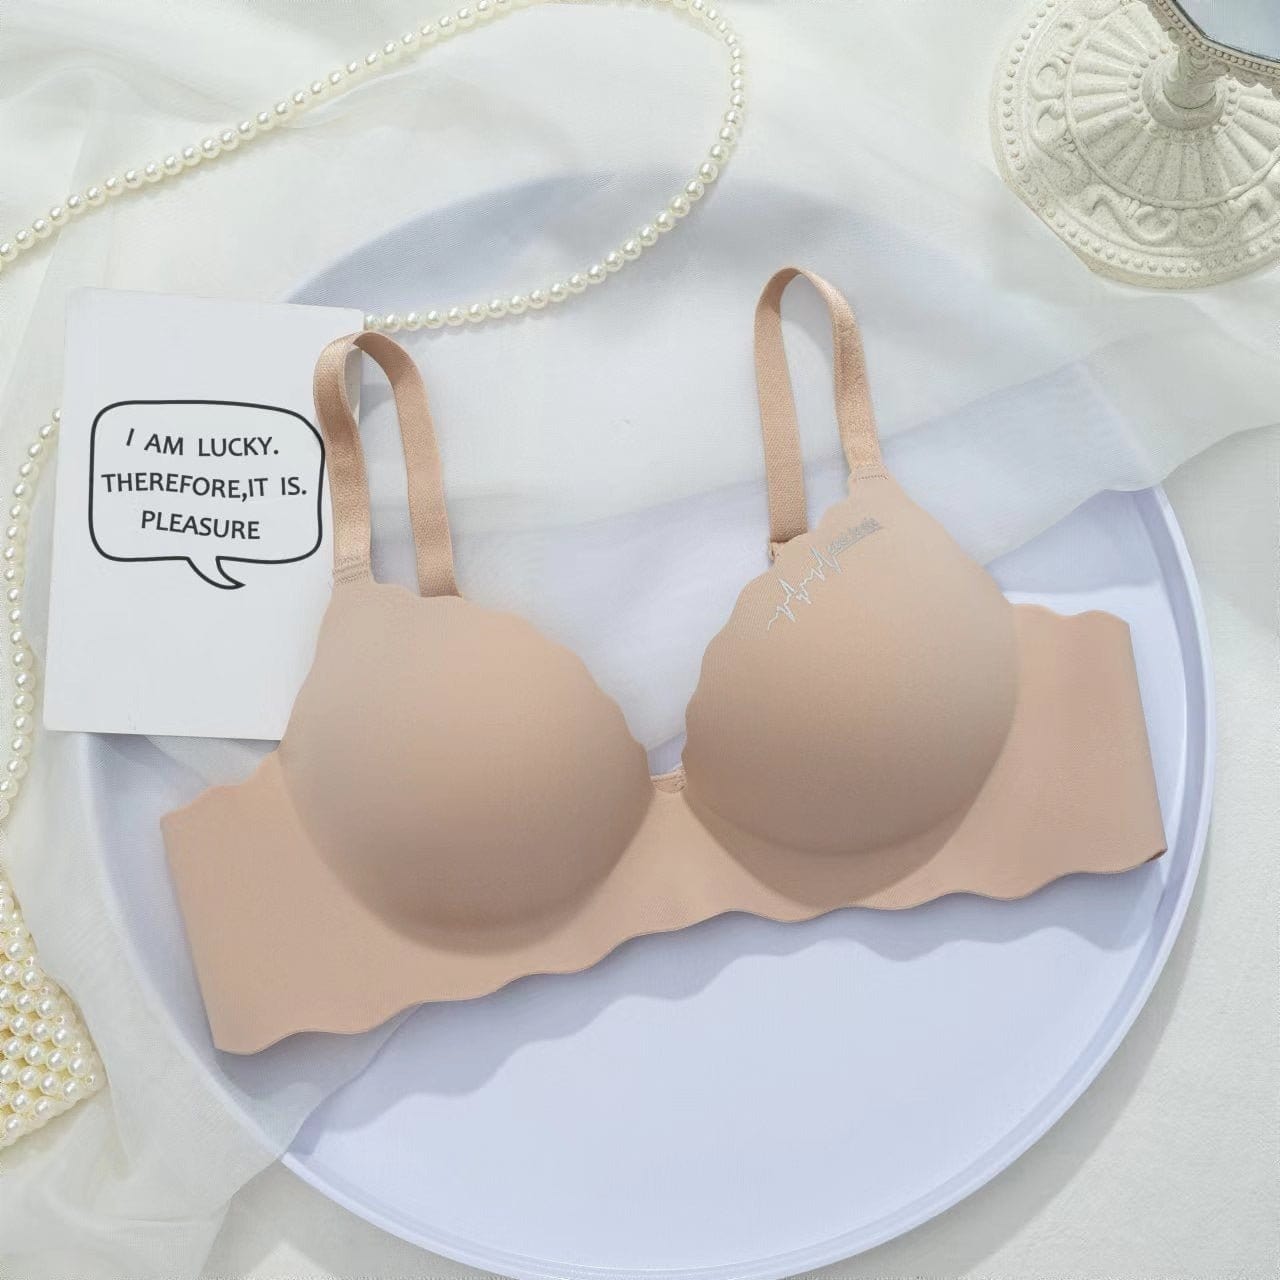 The New British Letters Underwear Girls a Thickening No Steel Ring Adjustment Type Gathering No Trace Bra - CLASSY CLOSET BOUTIQUEThe New British Letters Underwear Girls a Thickening No Steel Ring Adjustment Type Gathering No Trace Braeperlo53D8E40293E9402883D25C3A0D91E2AASkin Color32/70AB